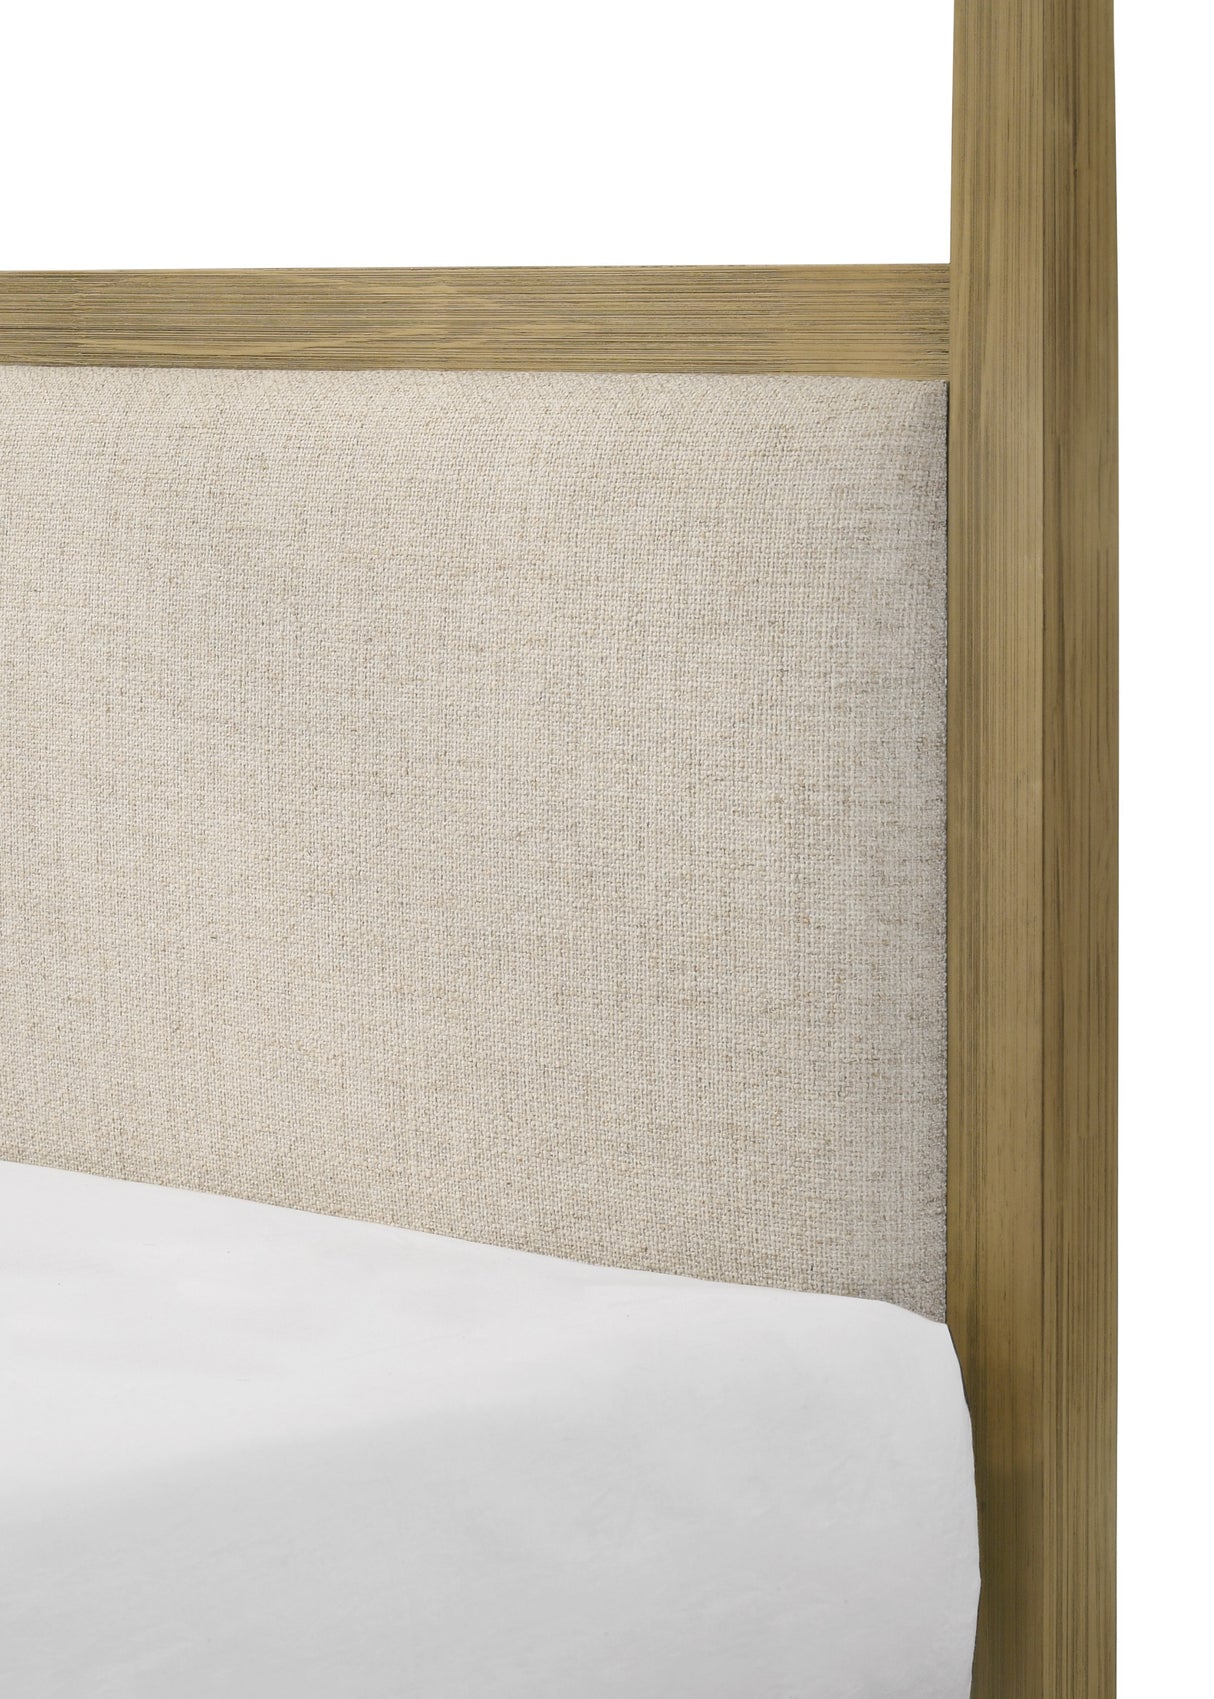 Sienna Rustic Natural Queen Canopy Platform Bed